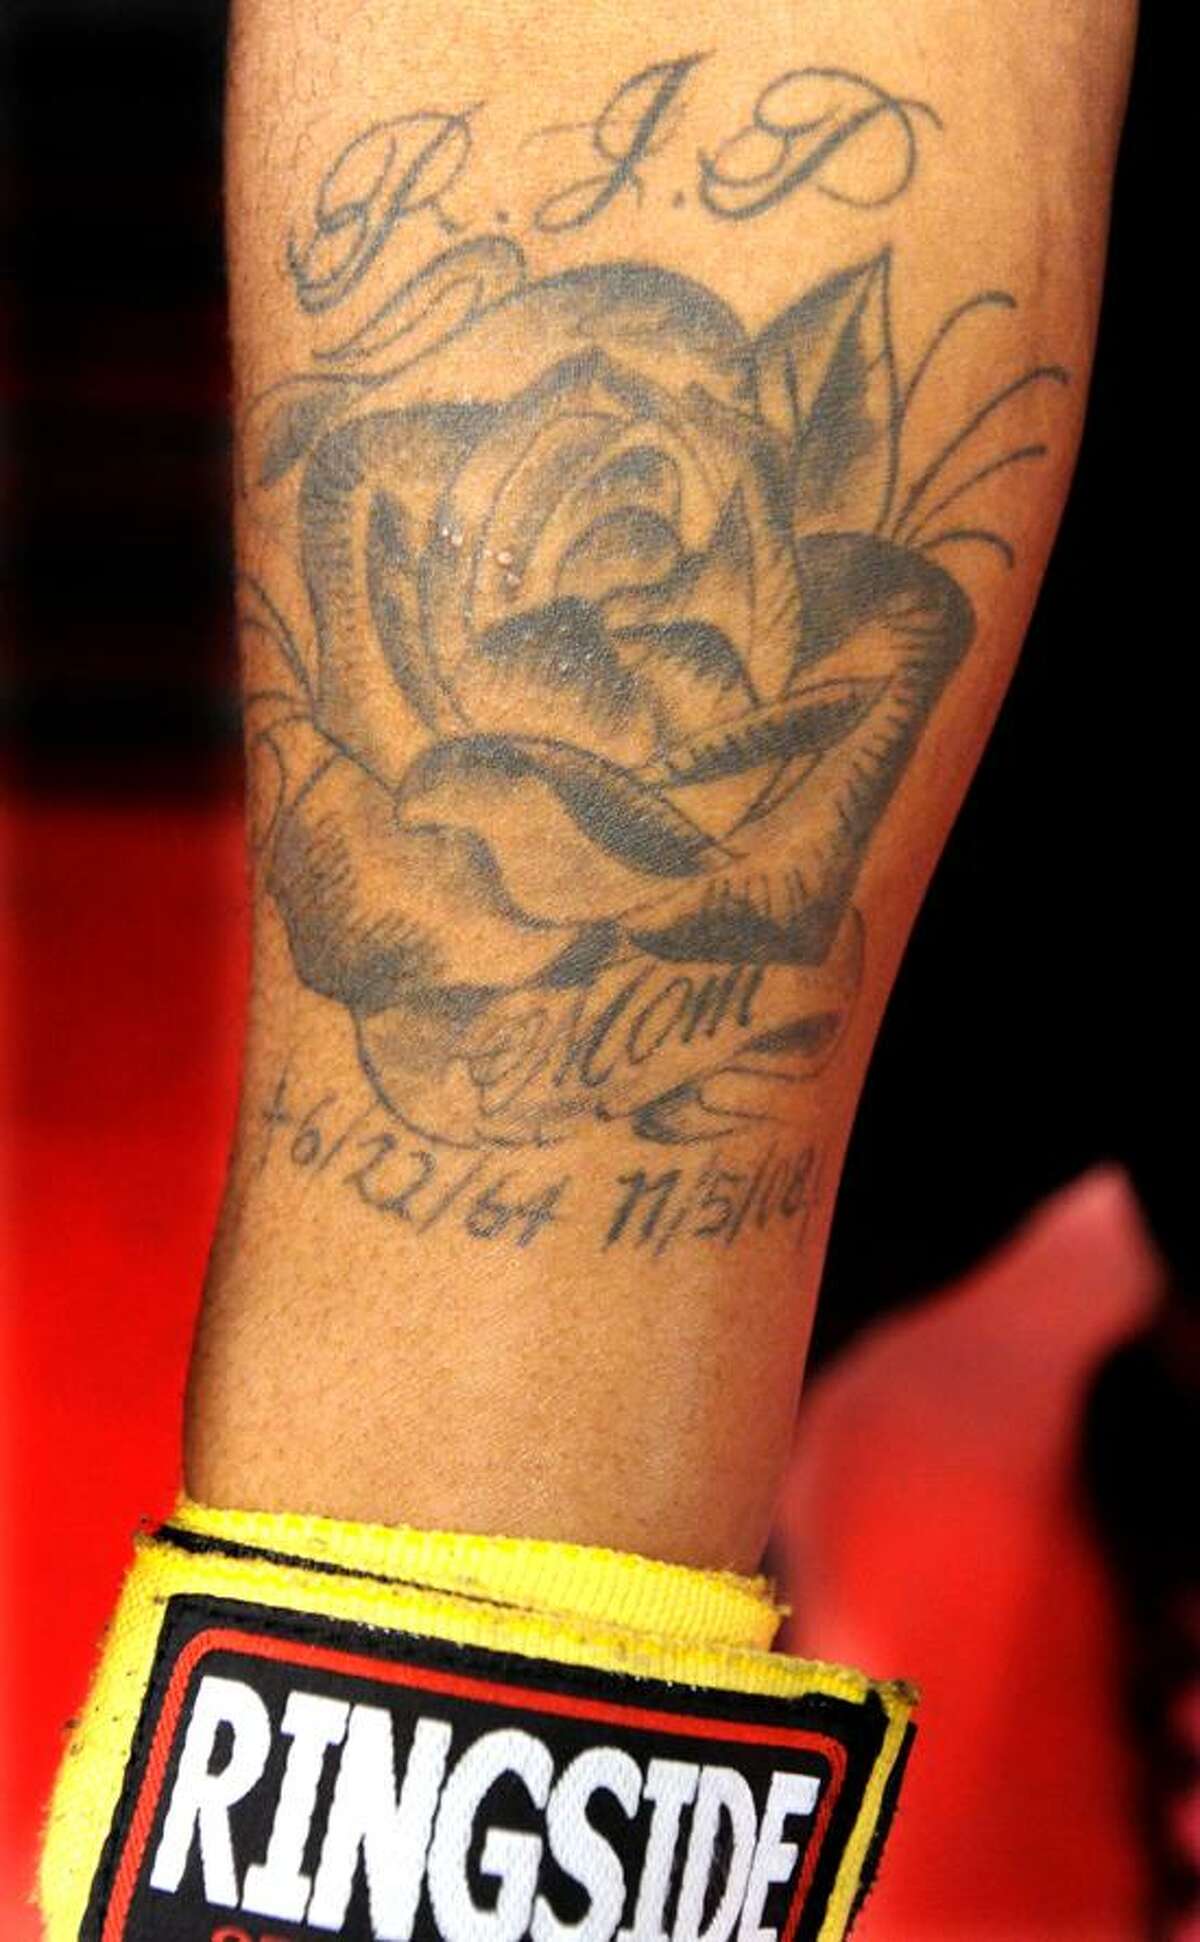 Boxer Jimmy Williams of West Haven at New Haven Boxing in North Haven. The tatoo memorializes his slain mother Belinda Jordan Williams, murdered in NJ in 2008. Mara Lavitt/New Haven Register1/15/13